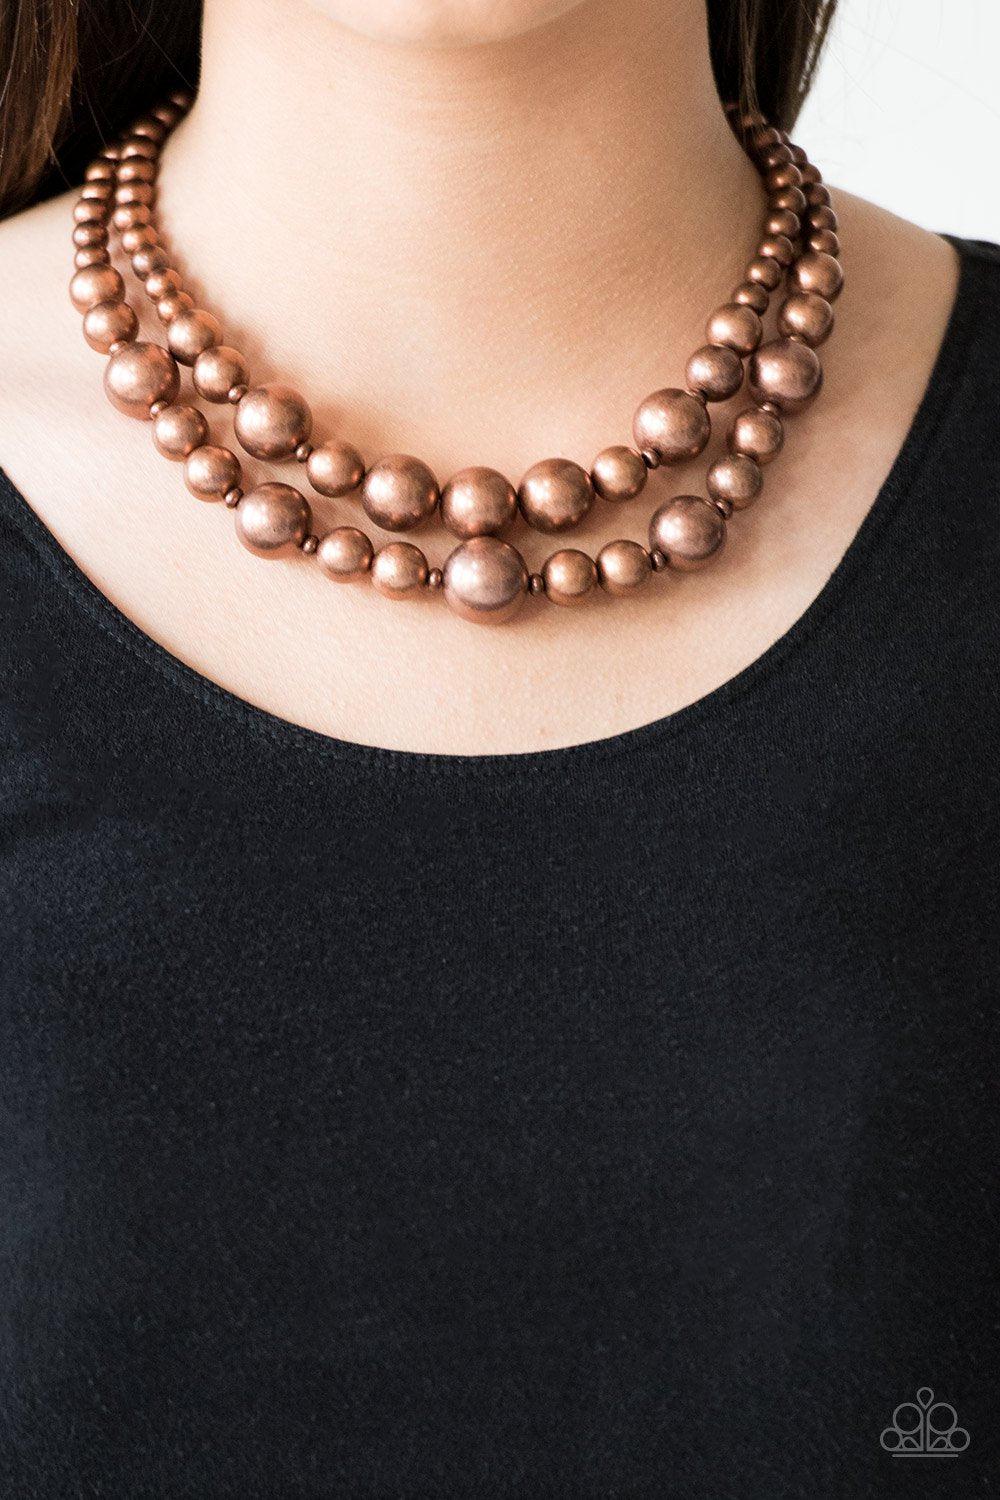 I Double Dare You Copper Pearl Necklace - Paparazzi Accessories- model - CarasShop.com - $5 Jewelry by Cara Jewels